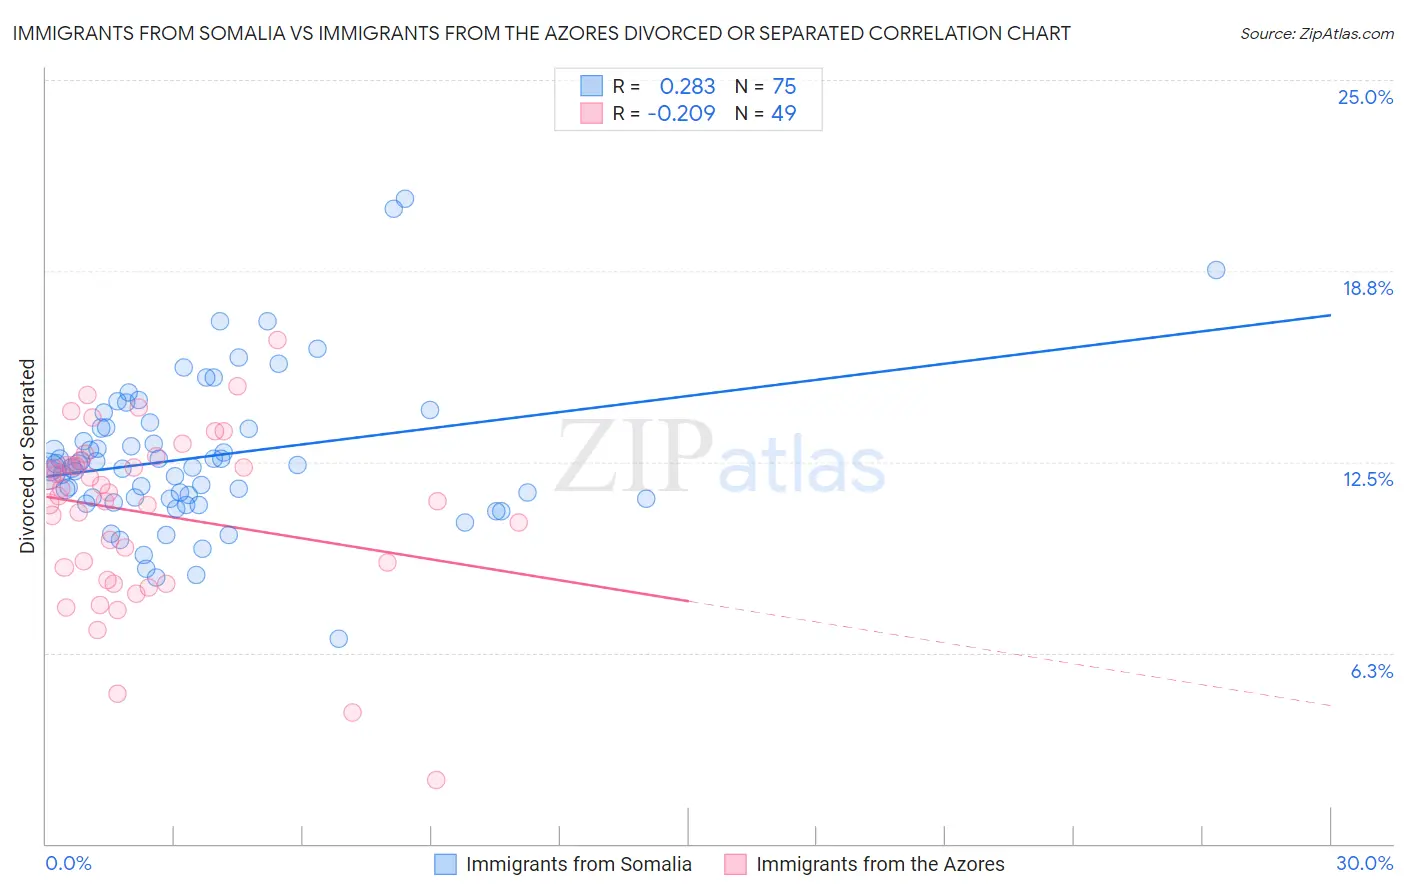 Immigrants from Somalia vs Immigrants from the Azores Divorced or Separated